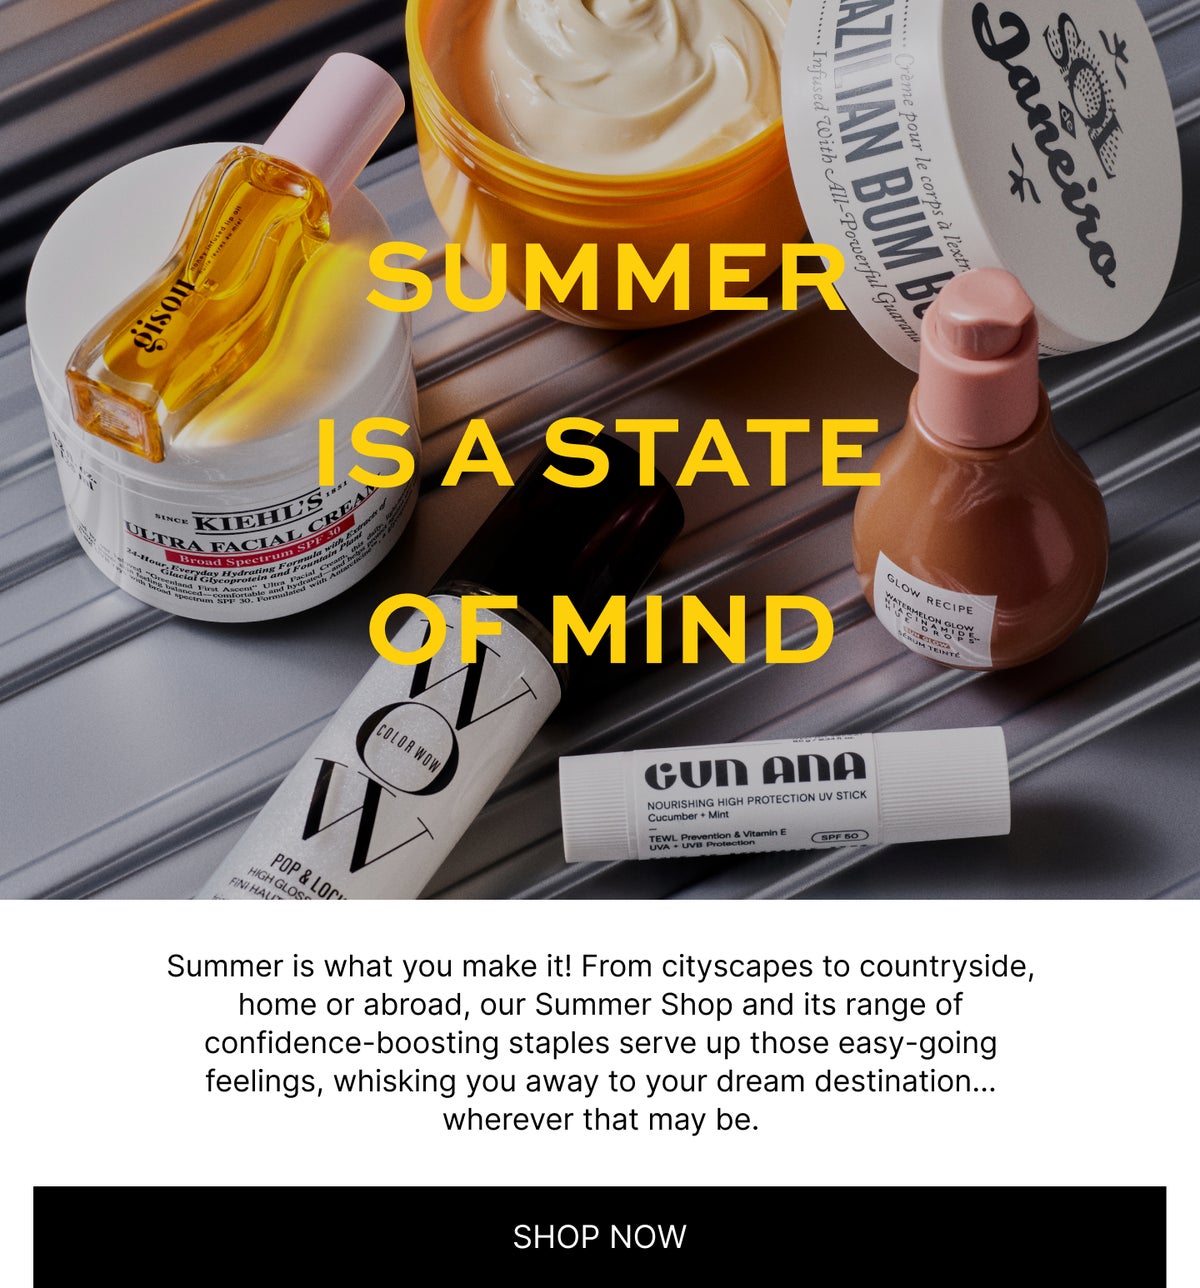 THE SUMMER SHOP  Sun hats at the ready! Whether you're jetting off or spending the summer at home, we've curated our very favourite warm weather essentials to keep you glowing and protected all season long.